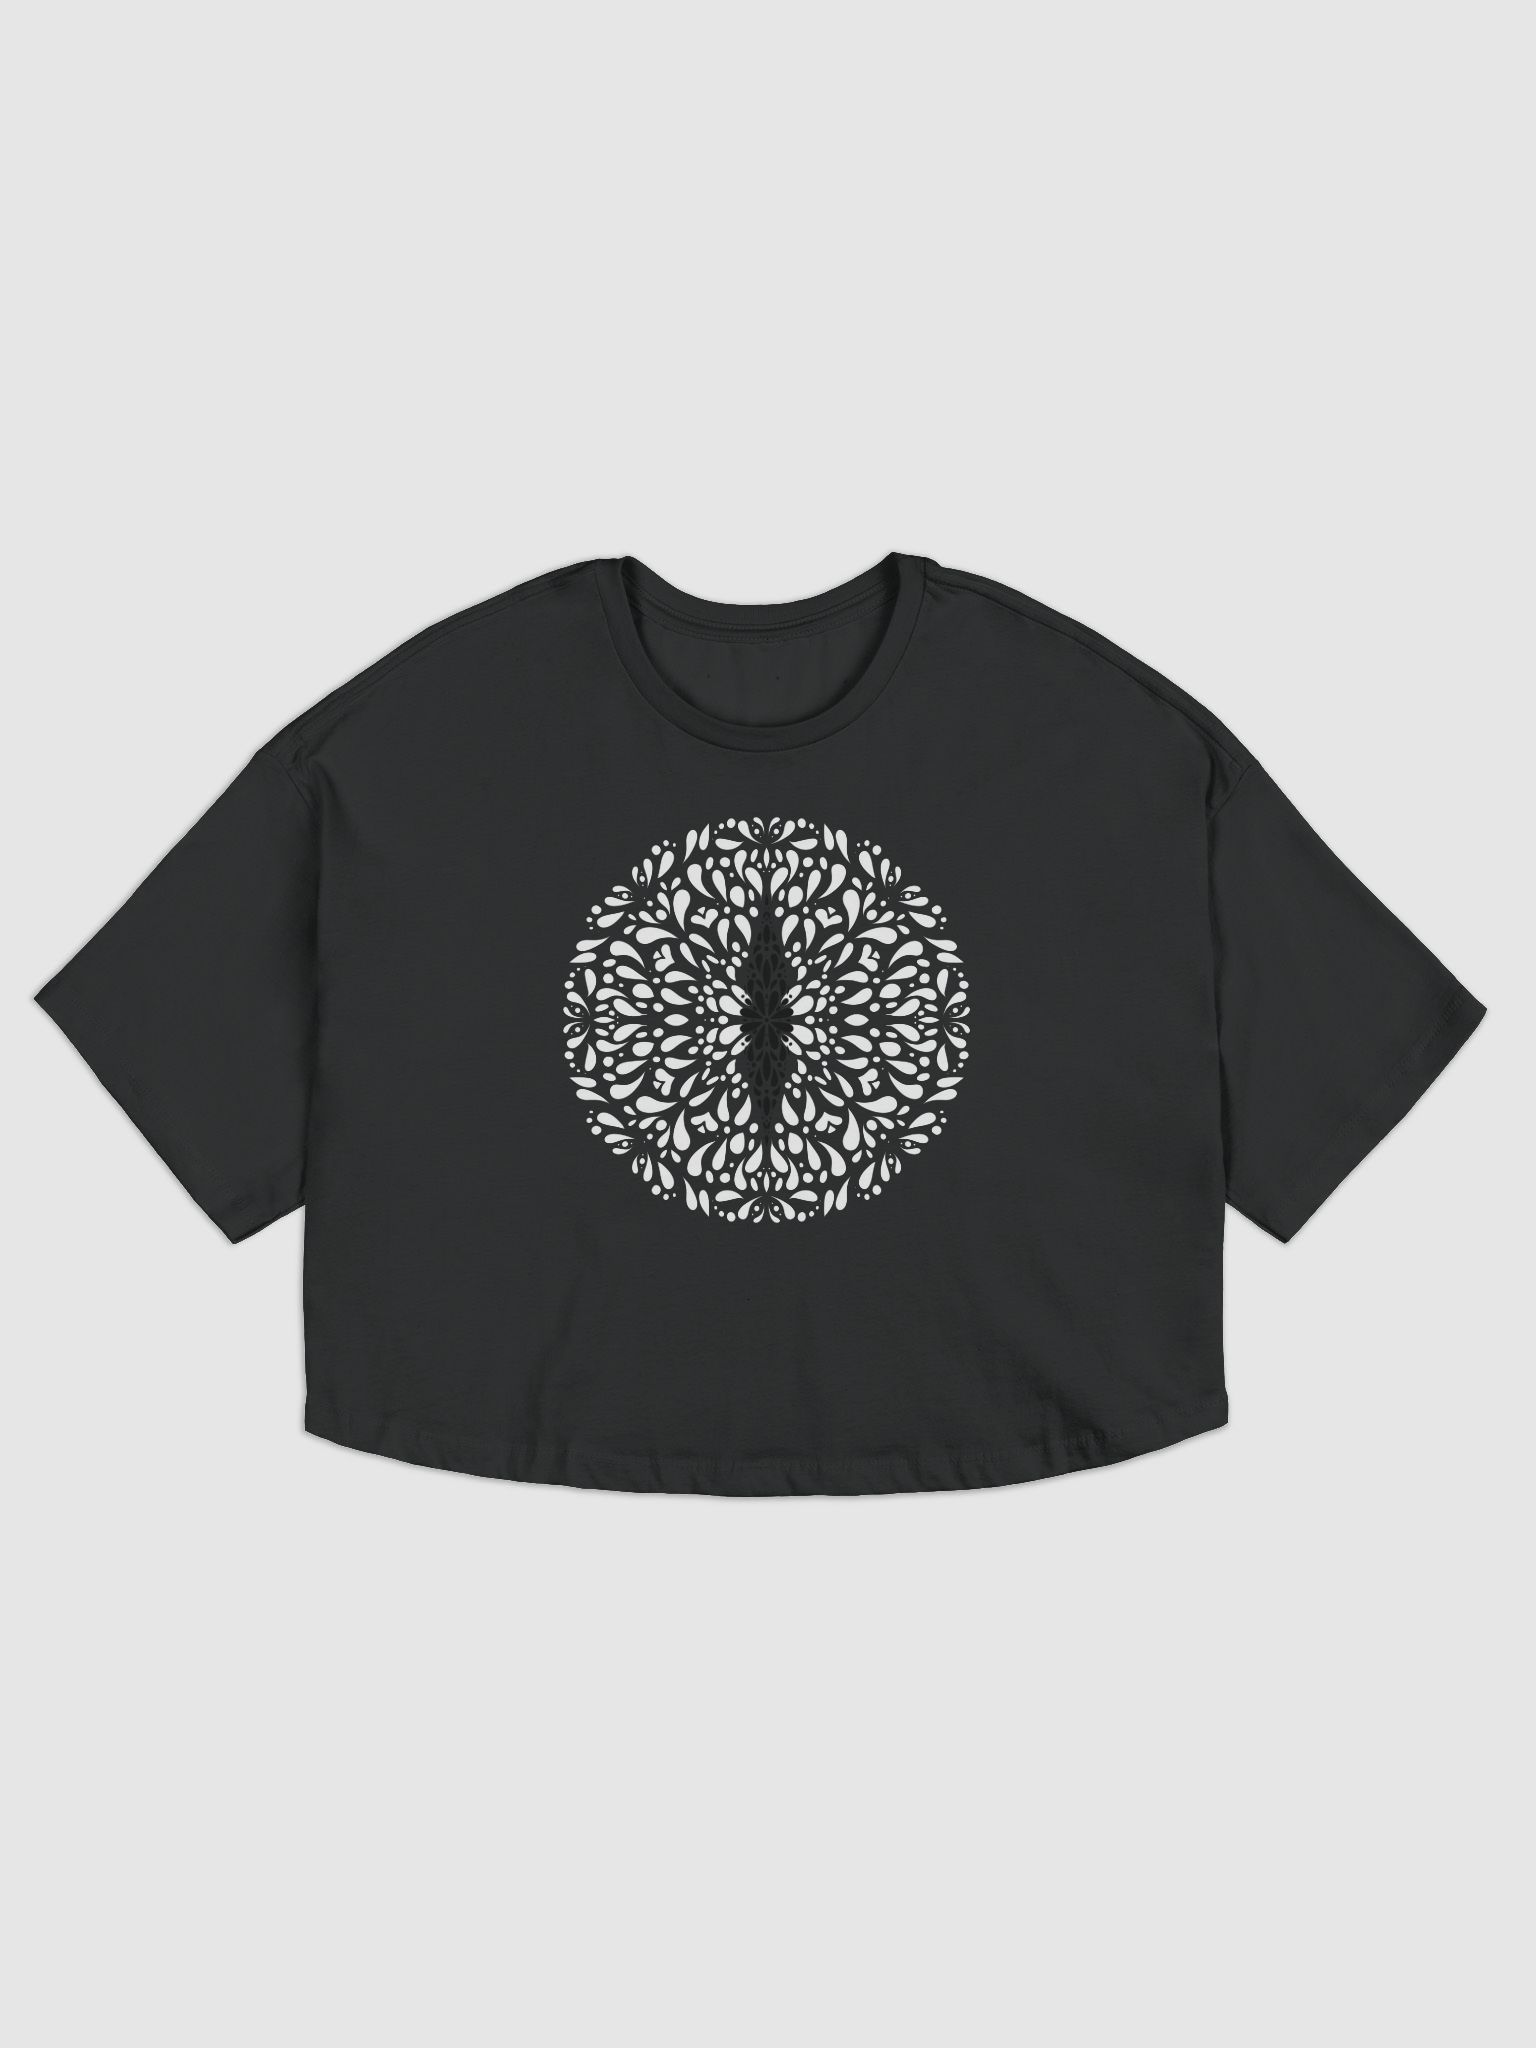 Higher Frequencies White/Black Ancestral Frequency Mandela Long Sleeve XL